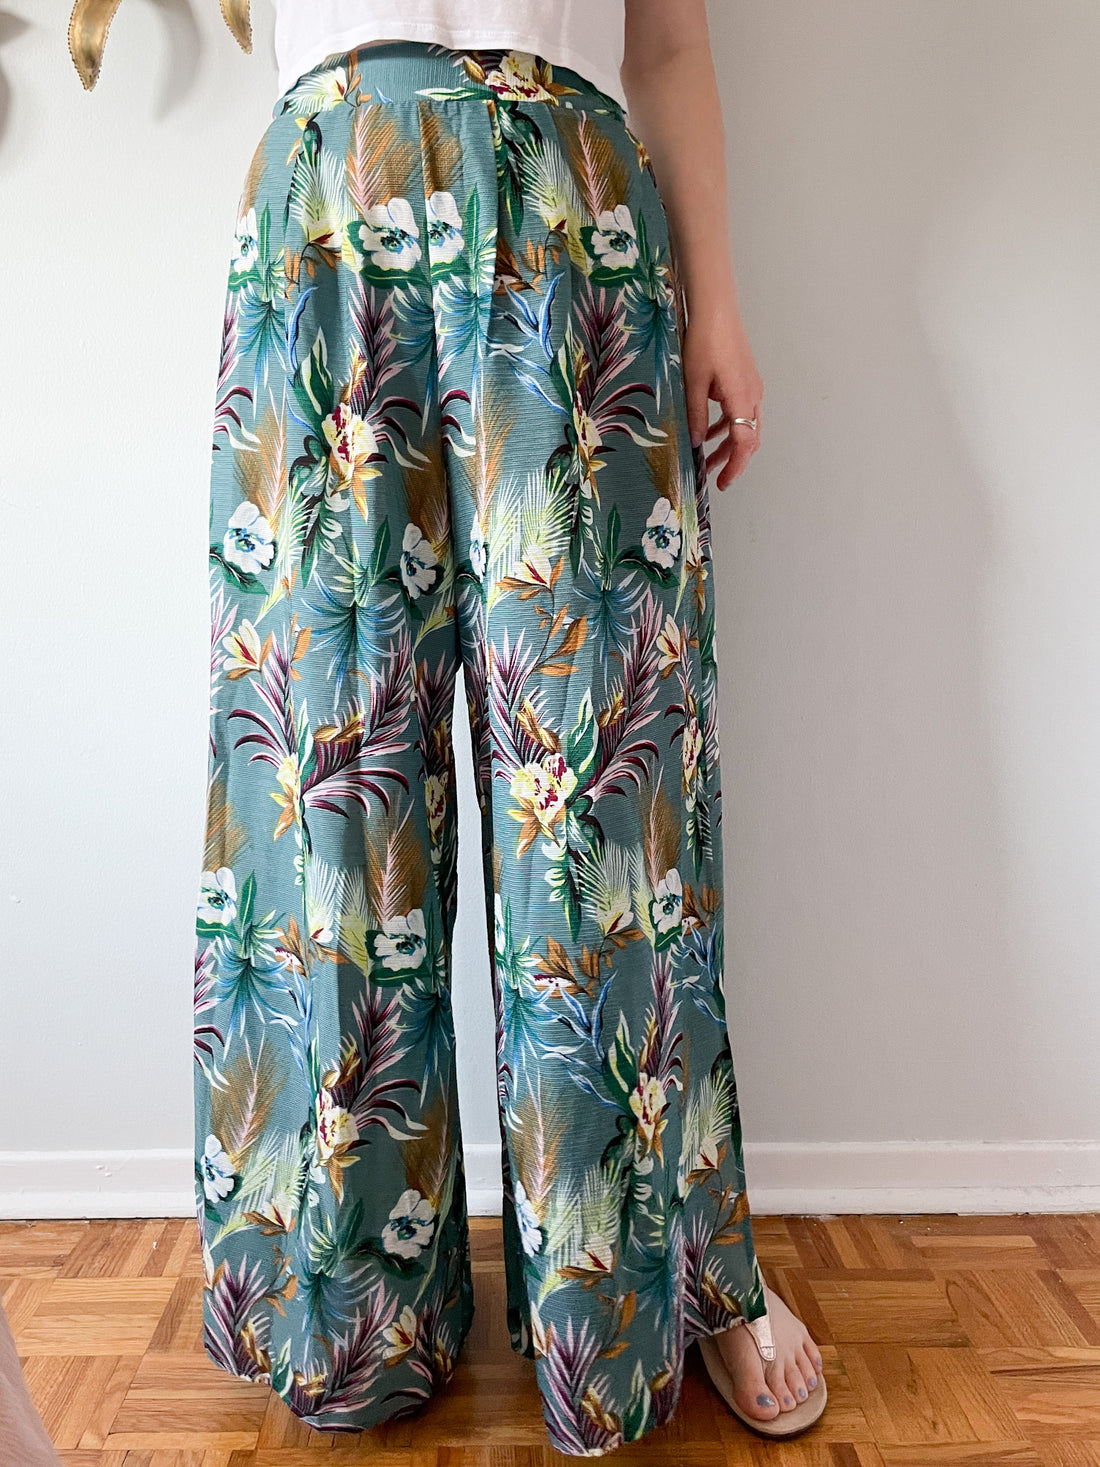 How To Style Floral Palazzo Pants In Fall